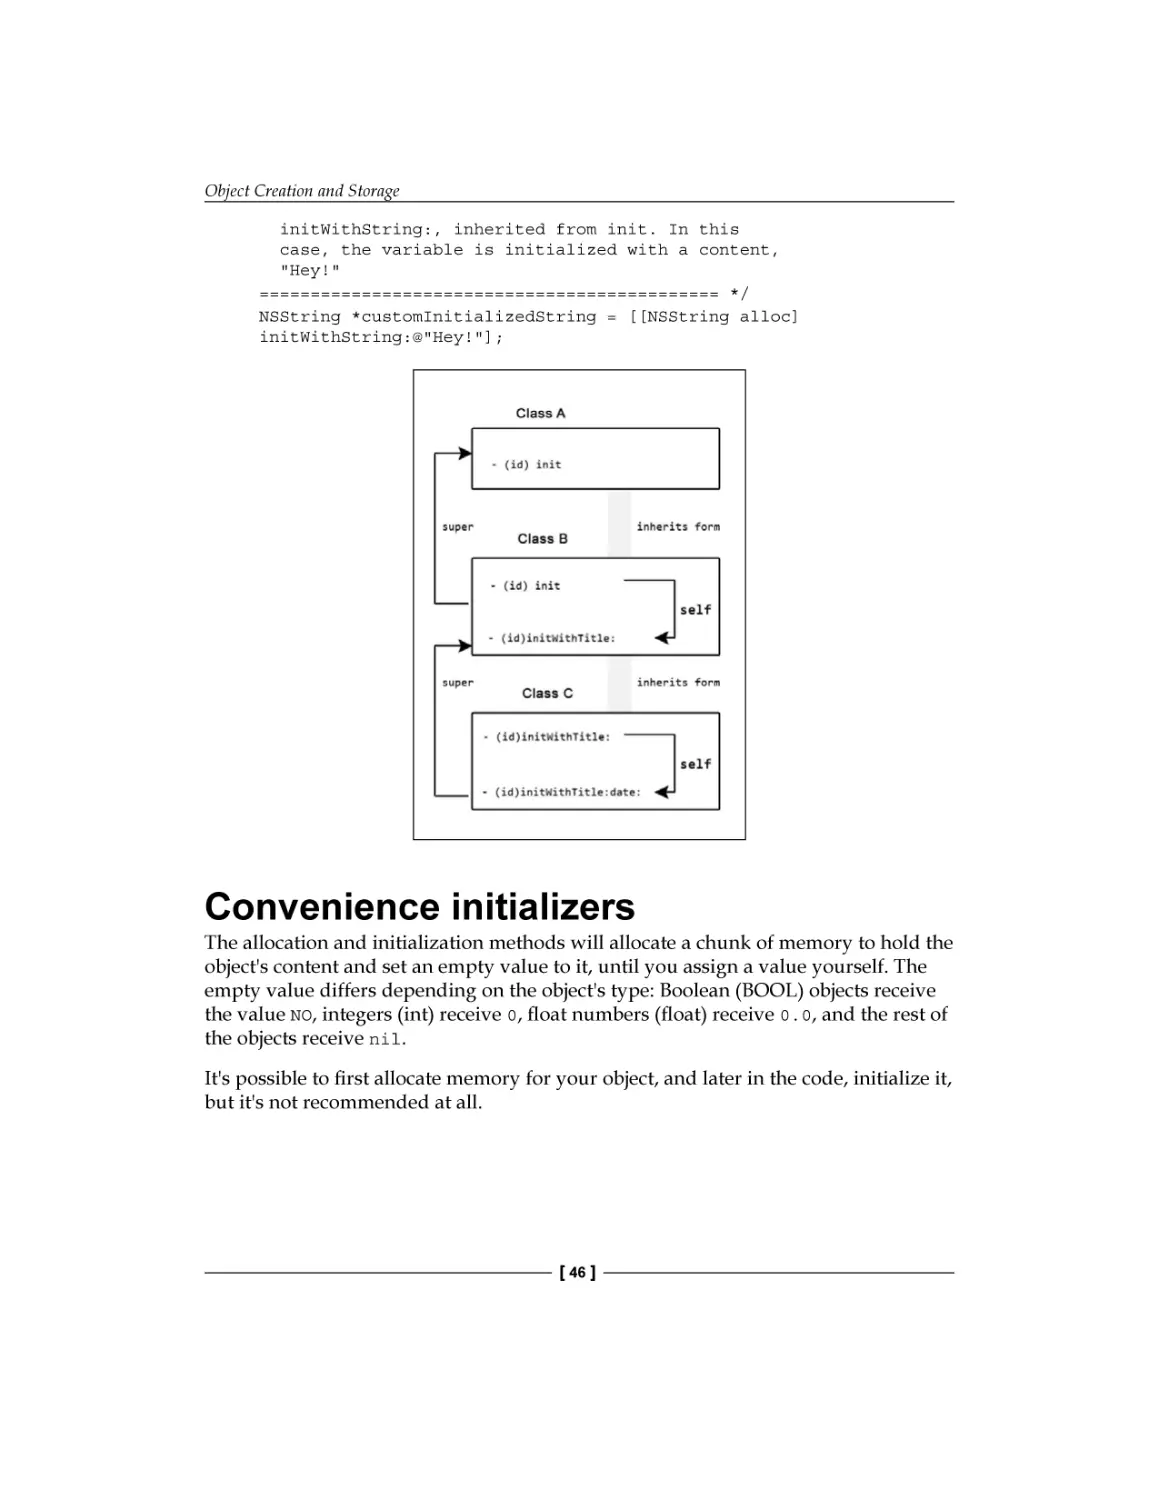 Convenience initializers